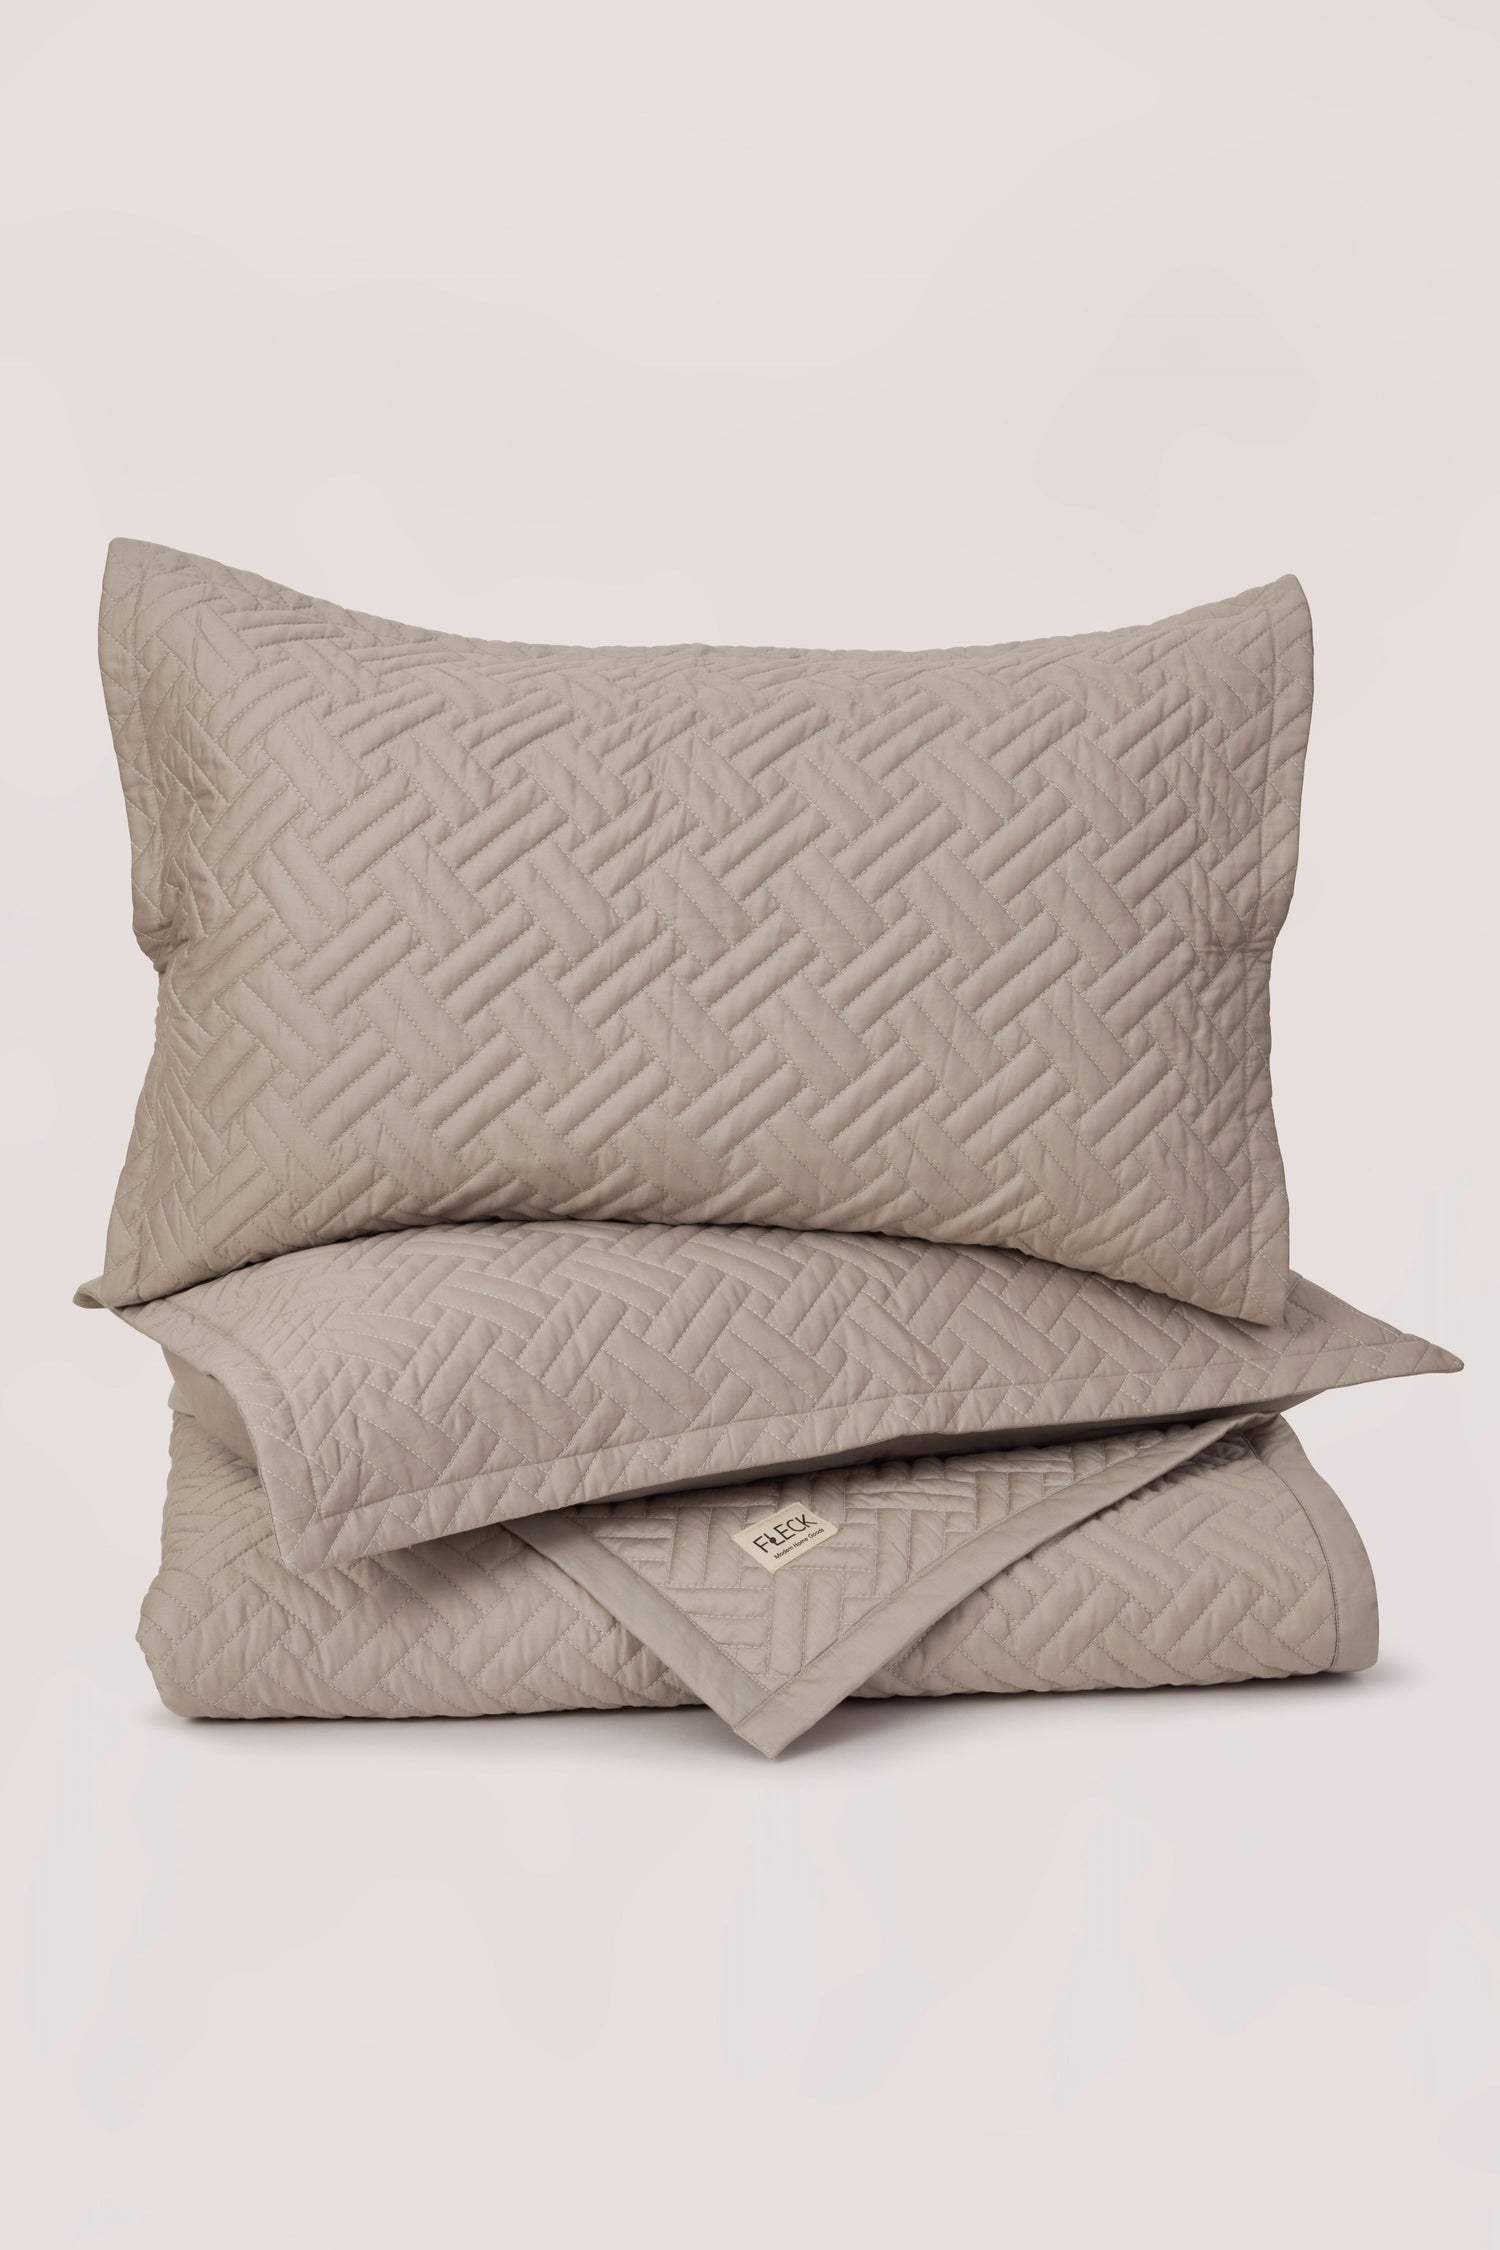 Pewter basketweave quilt and two shams made with 100% organic cotton sateen